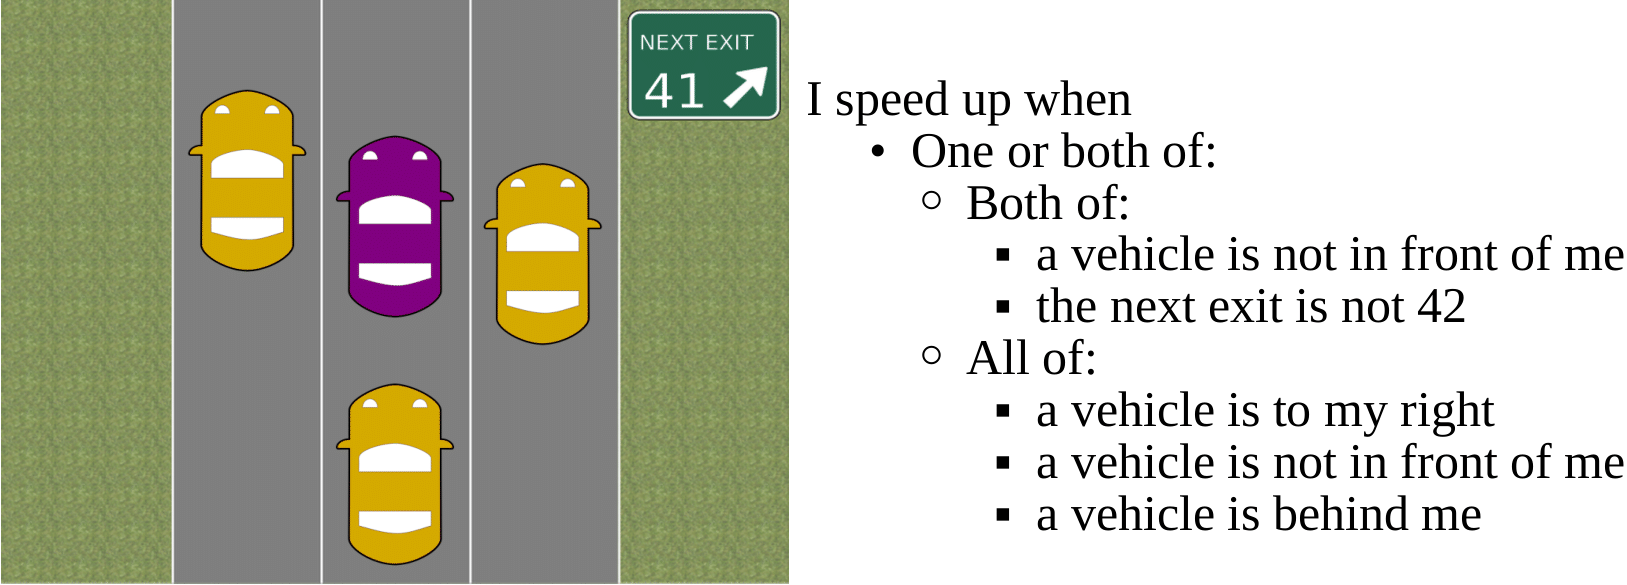 A scene showing how a user might view a logical summary and a system state. The image shows a car with cars to its left, right, and behind. The description says 'I speed up when one or both of: (1) Both of: - a vehicle is not in front of me - the next exit is not 42. (2) All of: - a vehicle is to my right. - a vehicle is not in front of me. - a vehicle is behind me.